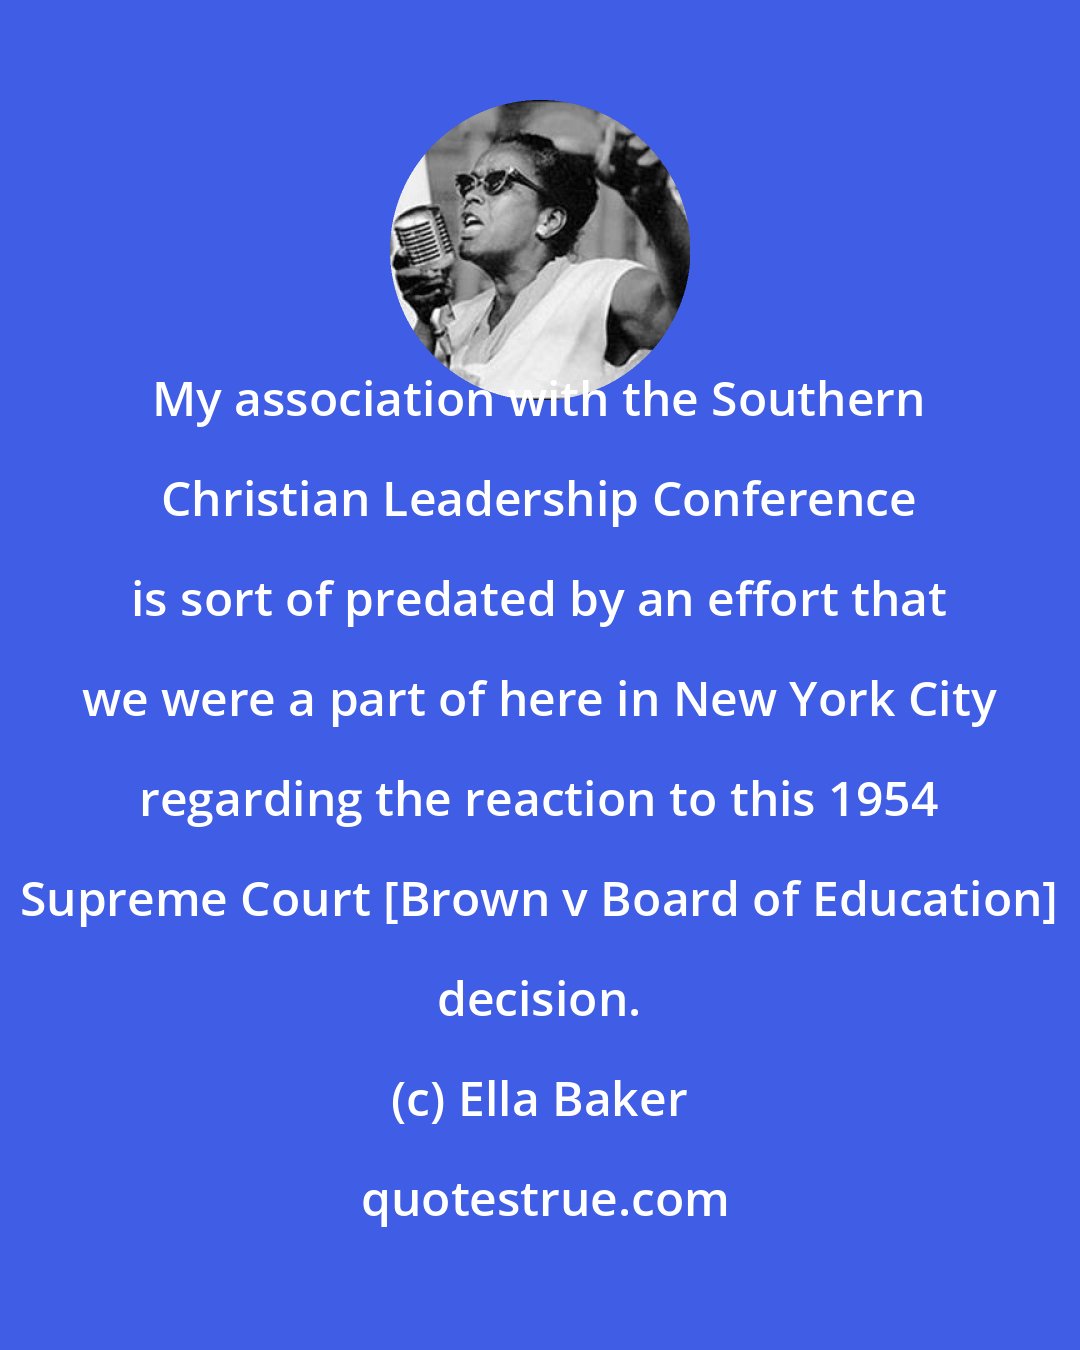 Ella Baker: My association with the Southern Christian Leadership Conference is sort of predated by an effort that we were a part of here in New York City regarding the reaction to this 1954 Supreme Court [Brown v Board of Education] decision.